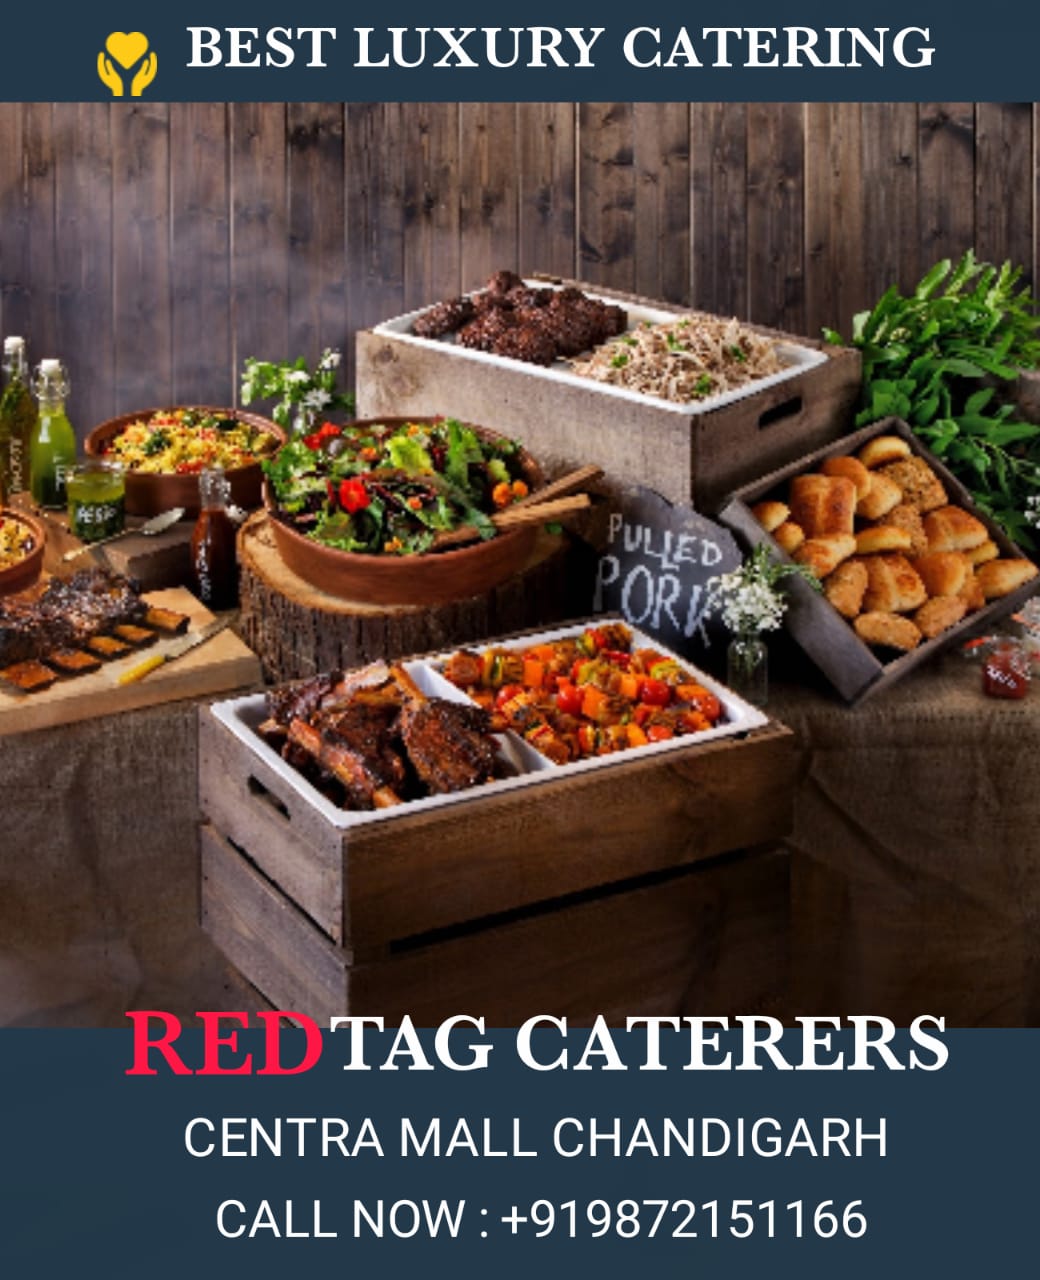 Professional and stress free catering service in Mohali punjab. | Red Tag Caterers | Best experience catering service in Mohali punjab, professional catering service in Mohali punjab, top quality catering service in Mohali punjab, best wedding catering service in Mohali punjab, luxury - GL46761